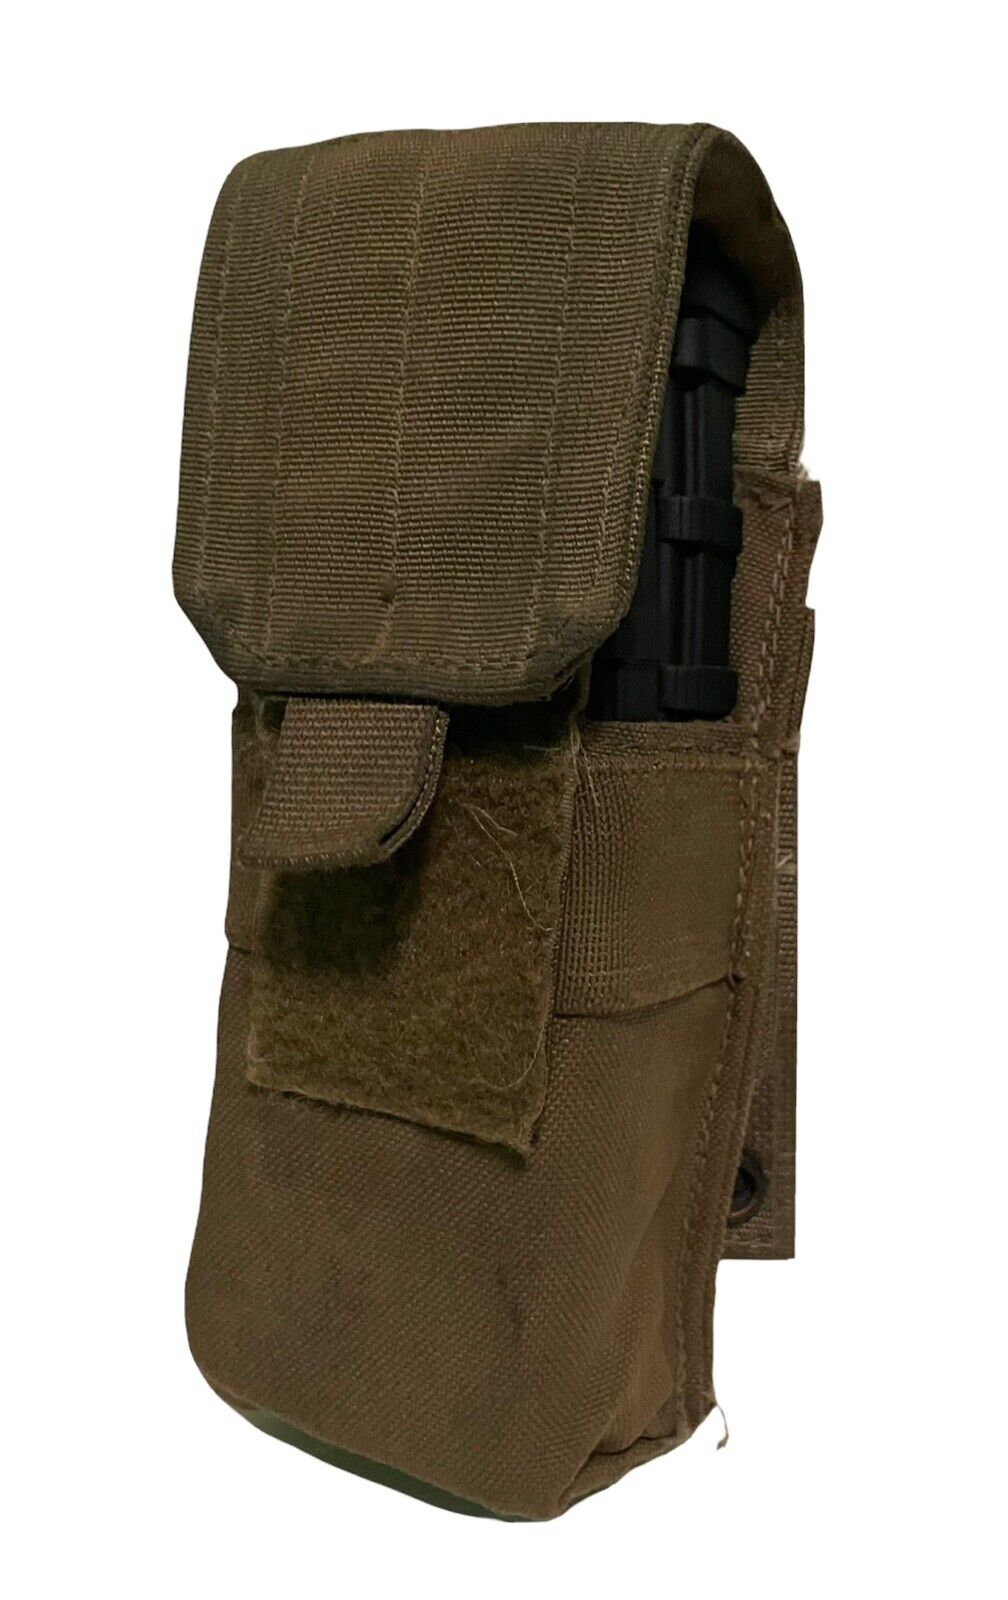 Single Double Mag Pouch